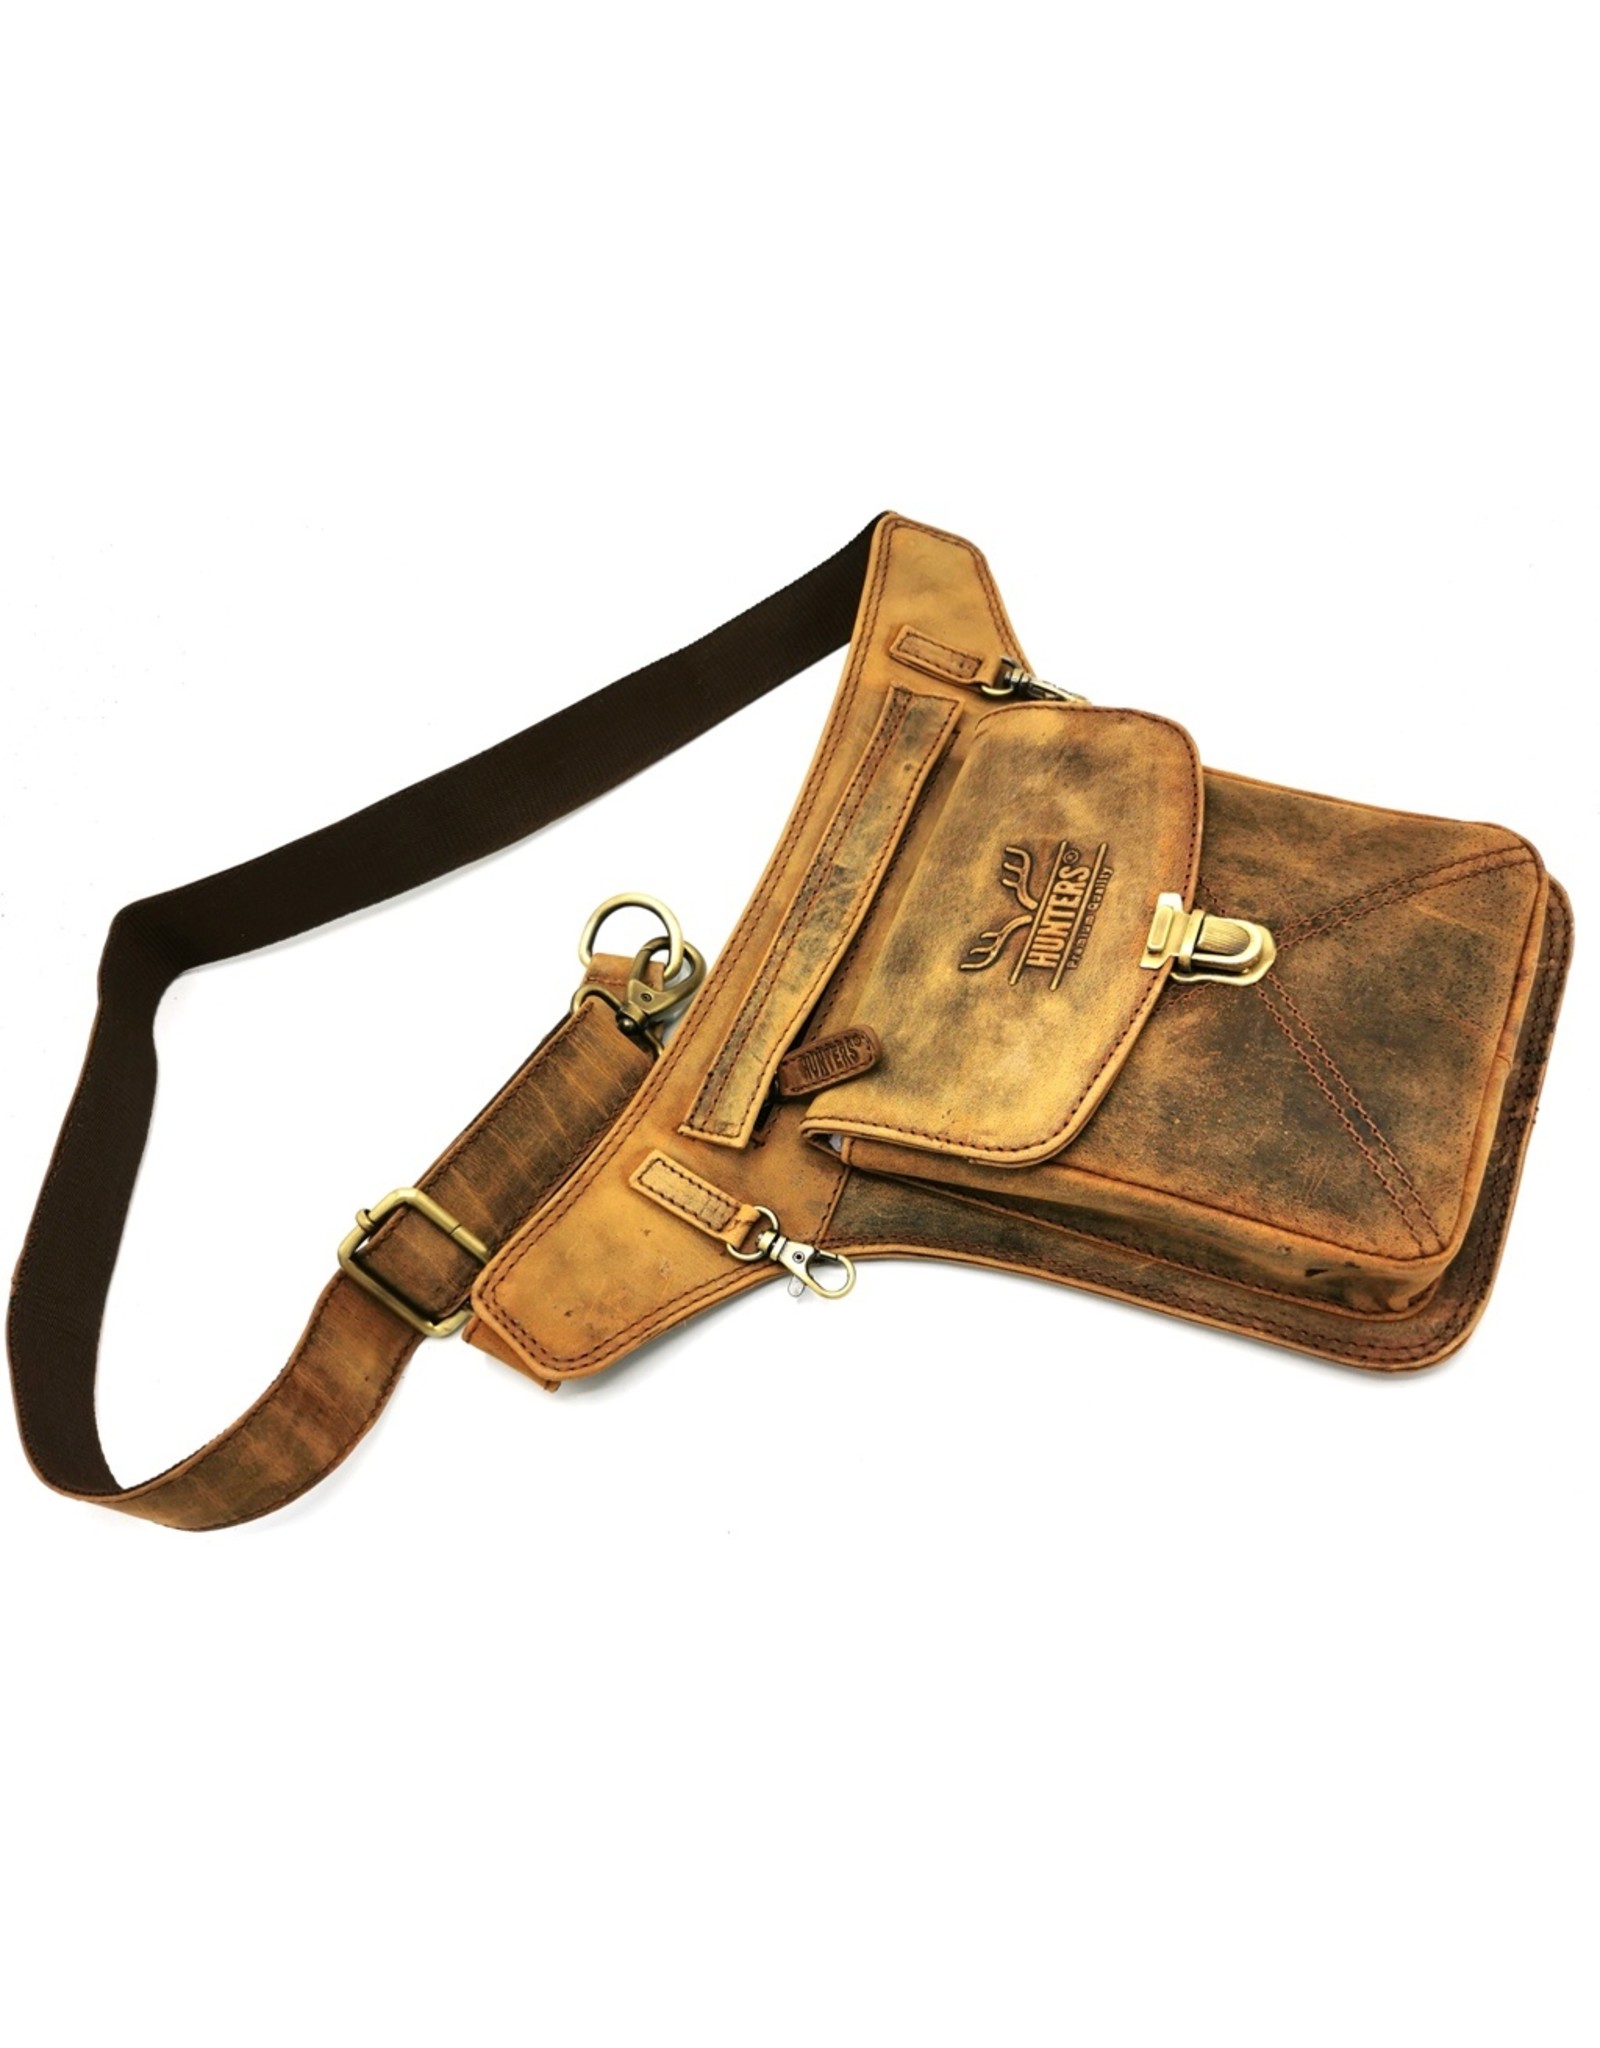 Hunters Leather Festival bags, waist bags and belt bags - Hunters waist bag vintage look tanned leather